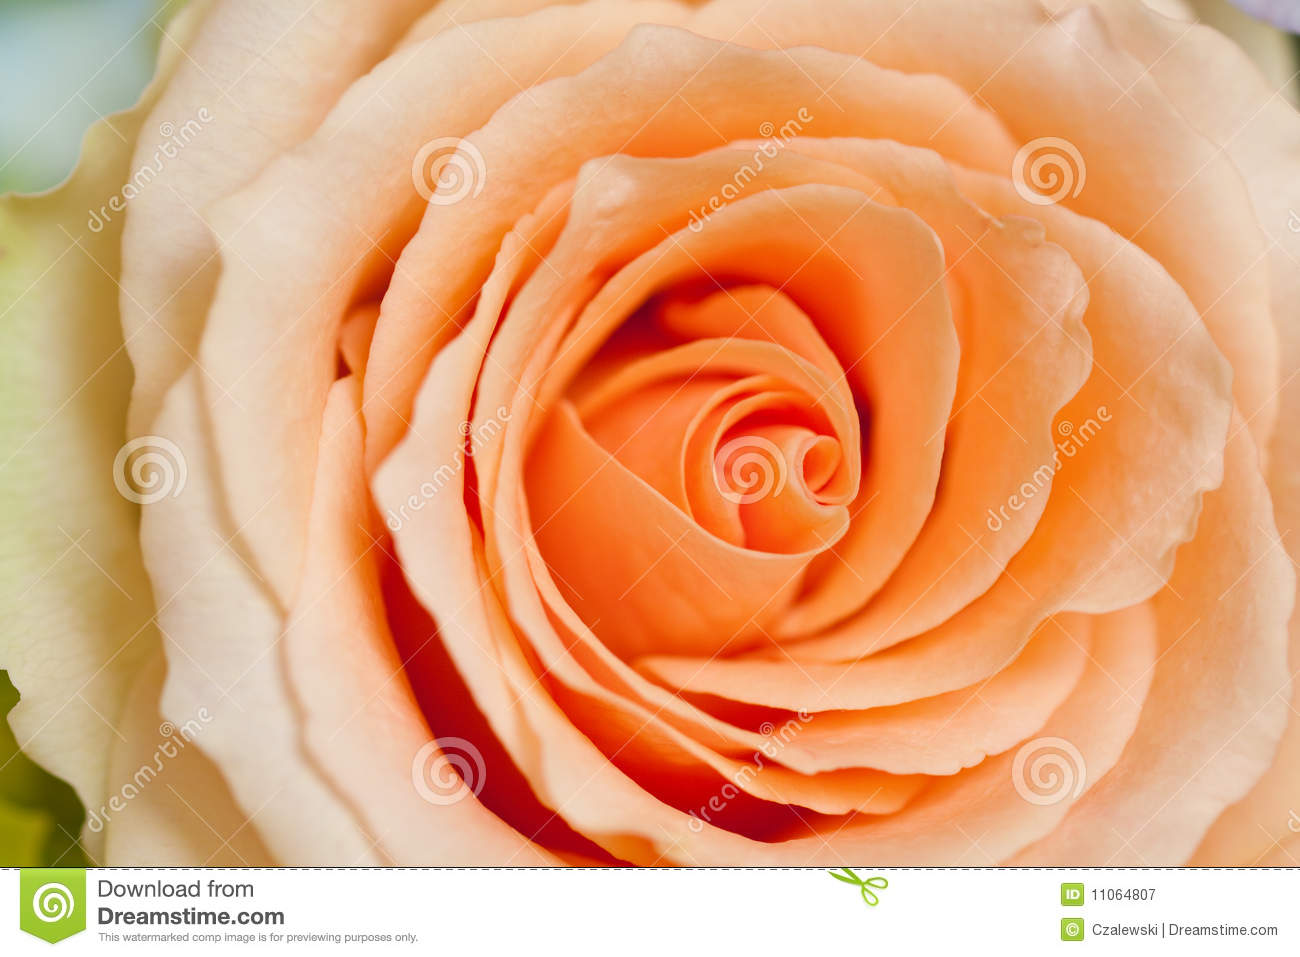 Peach Rose Royalty Free Stock Photography   Image  11064807